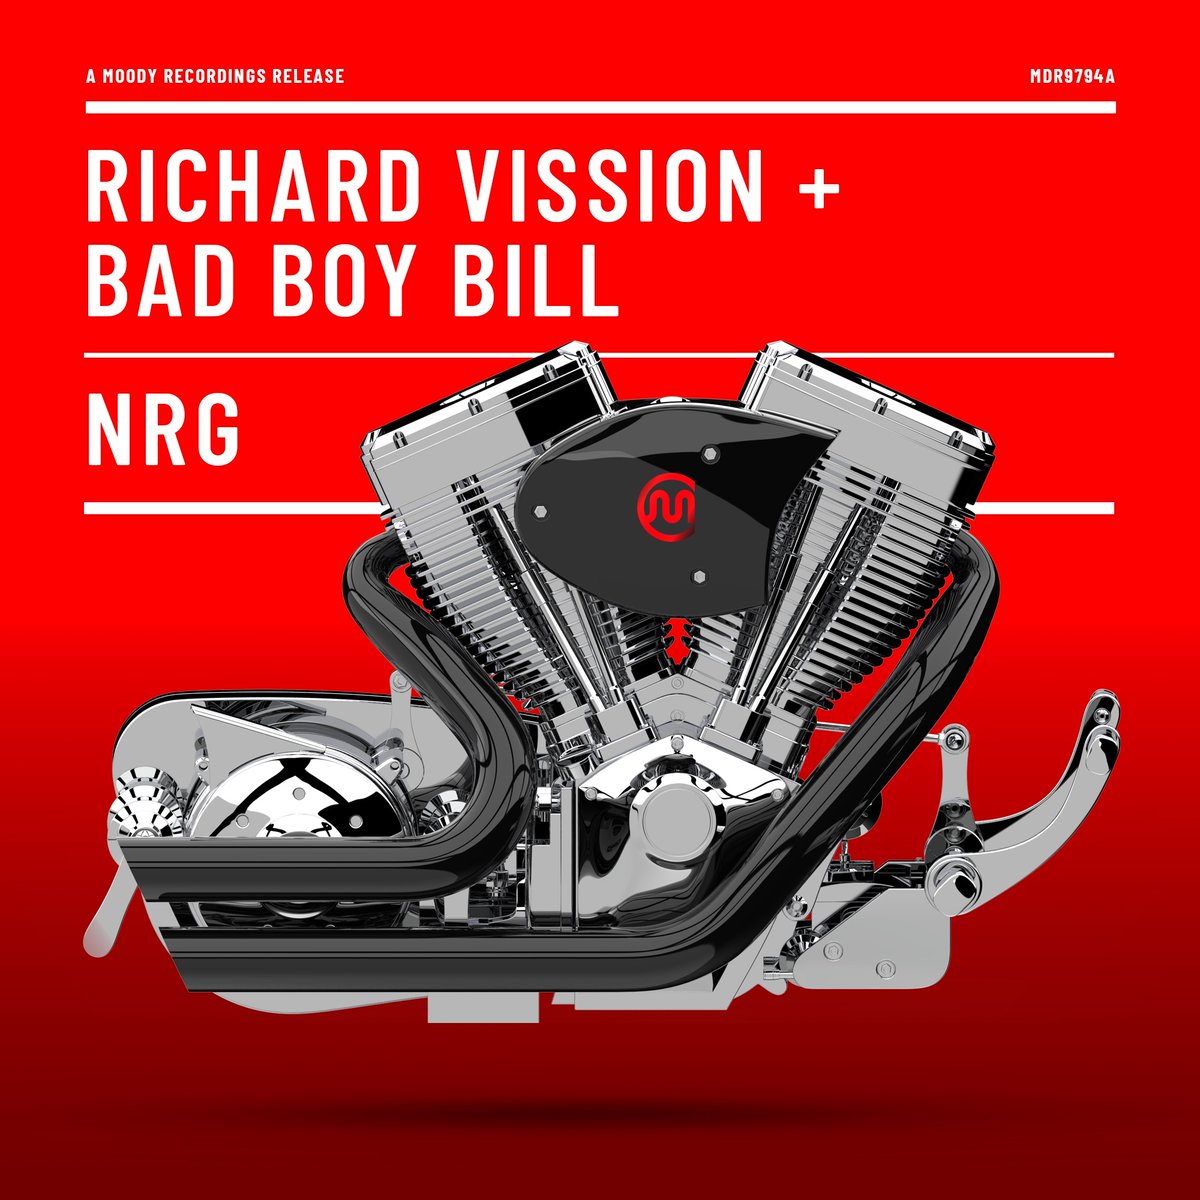 Big News we are Thrilled to announce 'NRG' from the two legends @richardvission and @djbadboybill coming out on all platforms May 10th ! Stay tuned for previews : #techhouse #NewMusicAlert #spotify #beatport